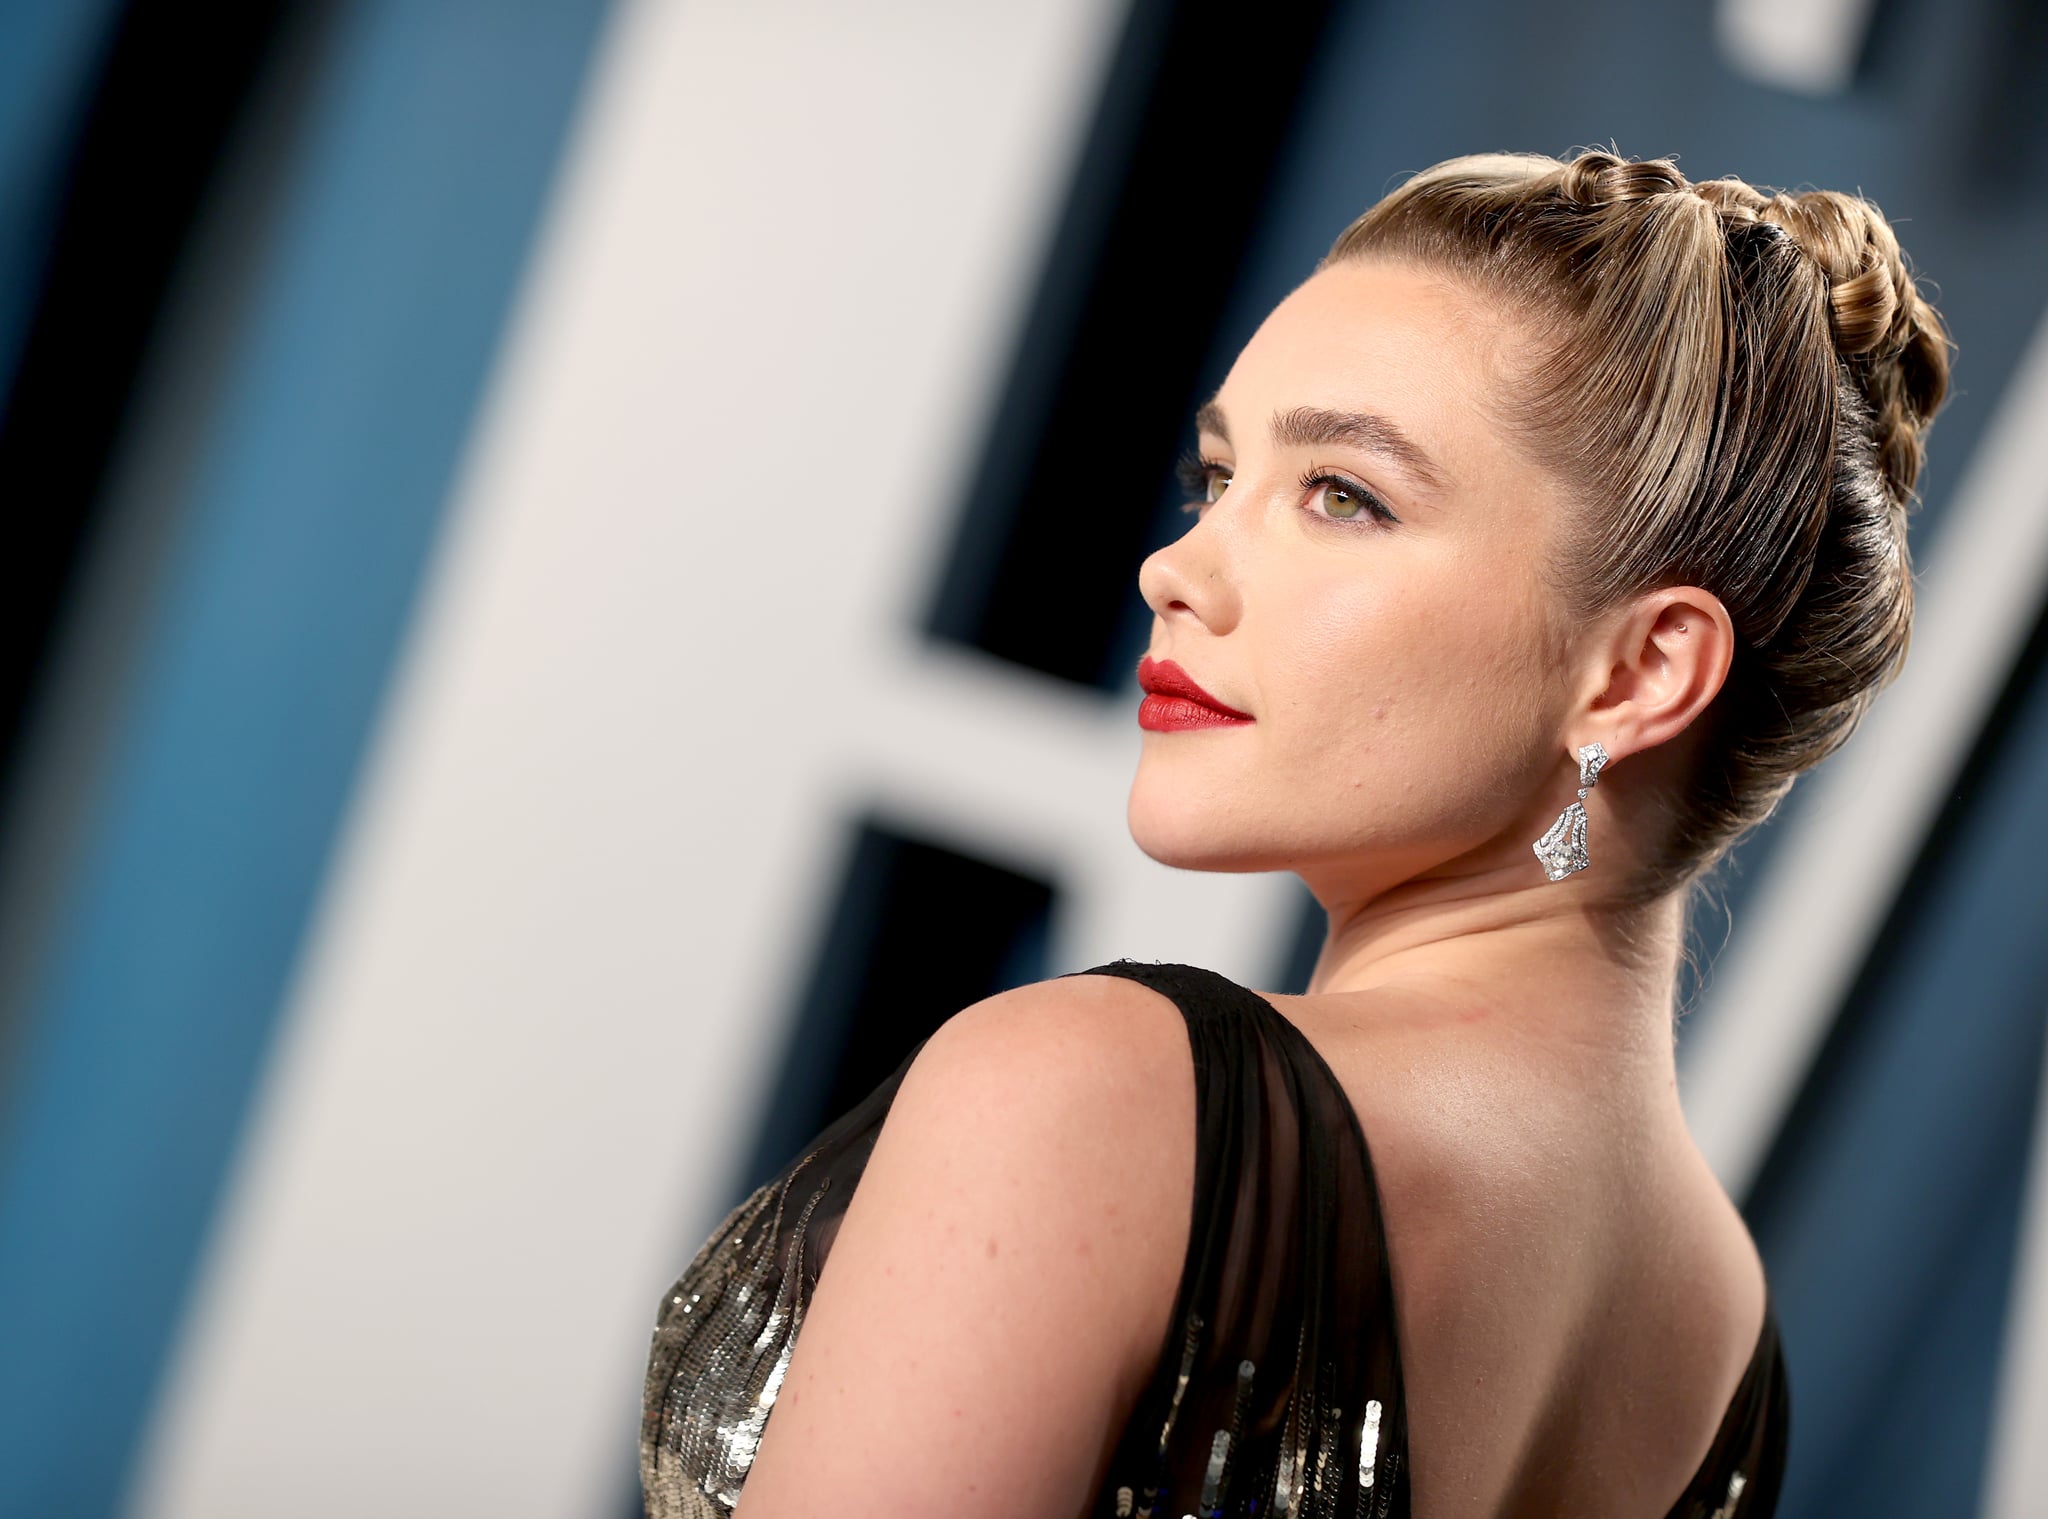 BEVERLY HILLS, CALIFORNIA - FEBRUARY 09: Florence Pugh attends the 2020 Vanity Fair Oscar Party hosted by Radhika Jones at Wallis Annenberg Center for the Performing Arts on February 09, 2020 in Beverly Hills, California. (Photo by Rich Fury/VF20/Getty Images for Vanity Fair)